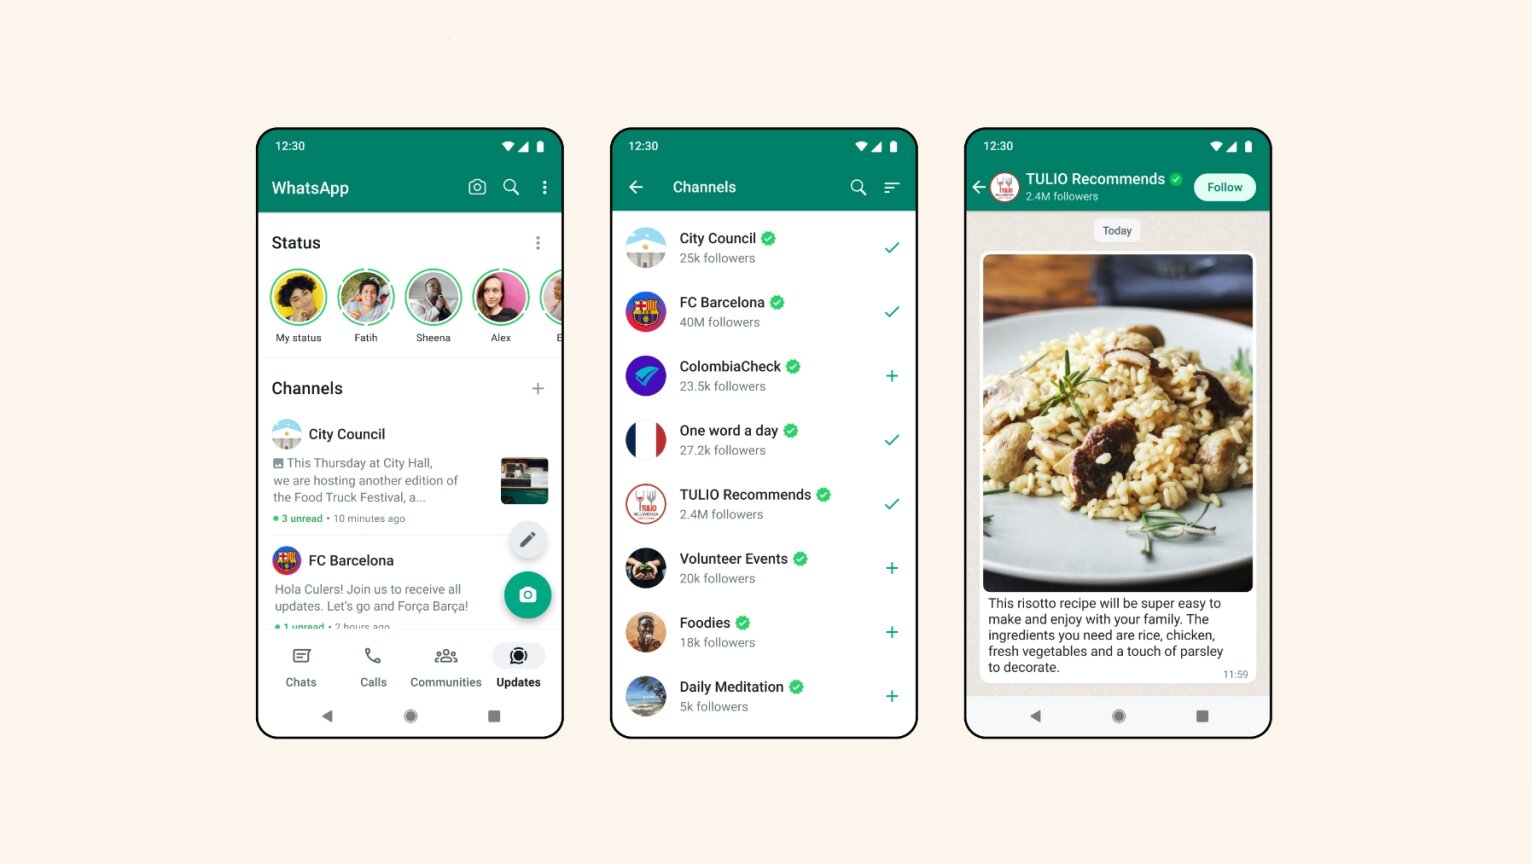 WhatsApp’s Channels feature allows users to follow organizations and people from within the app